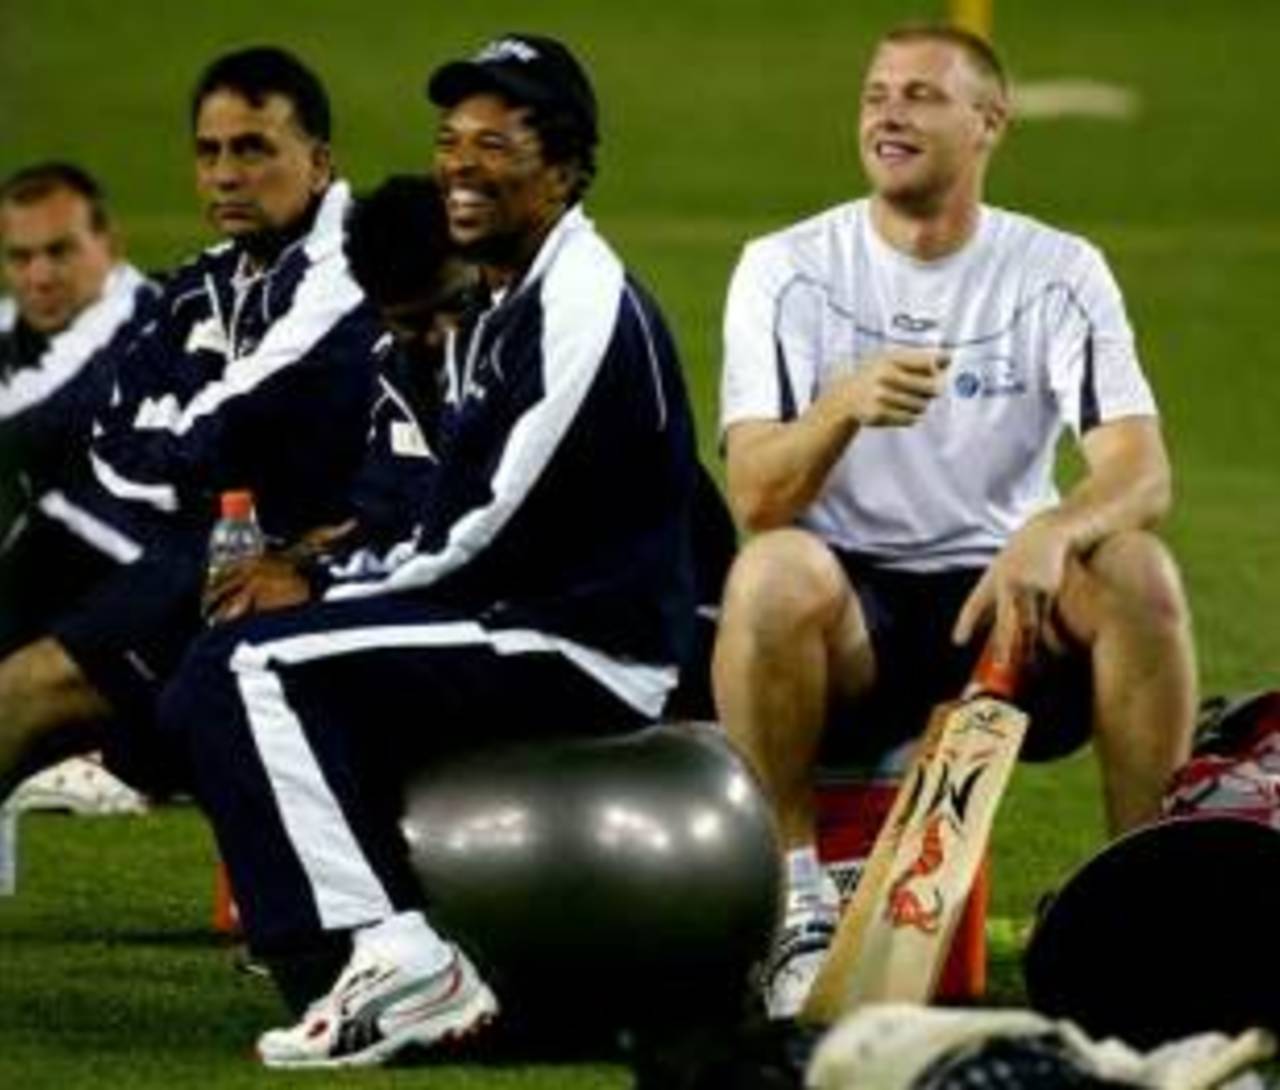 Makhaya Ntini and Andrew Flintoff in relaxed mood during a training session ahead of the ICC Super Series Trophy, Melbourne, October 3, 2005